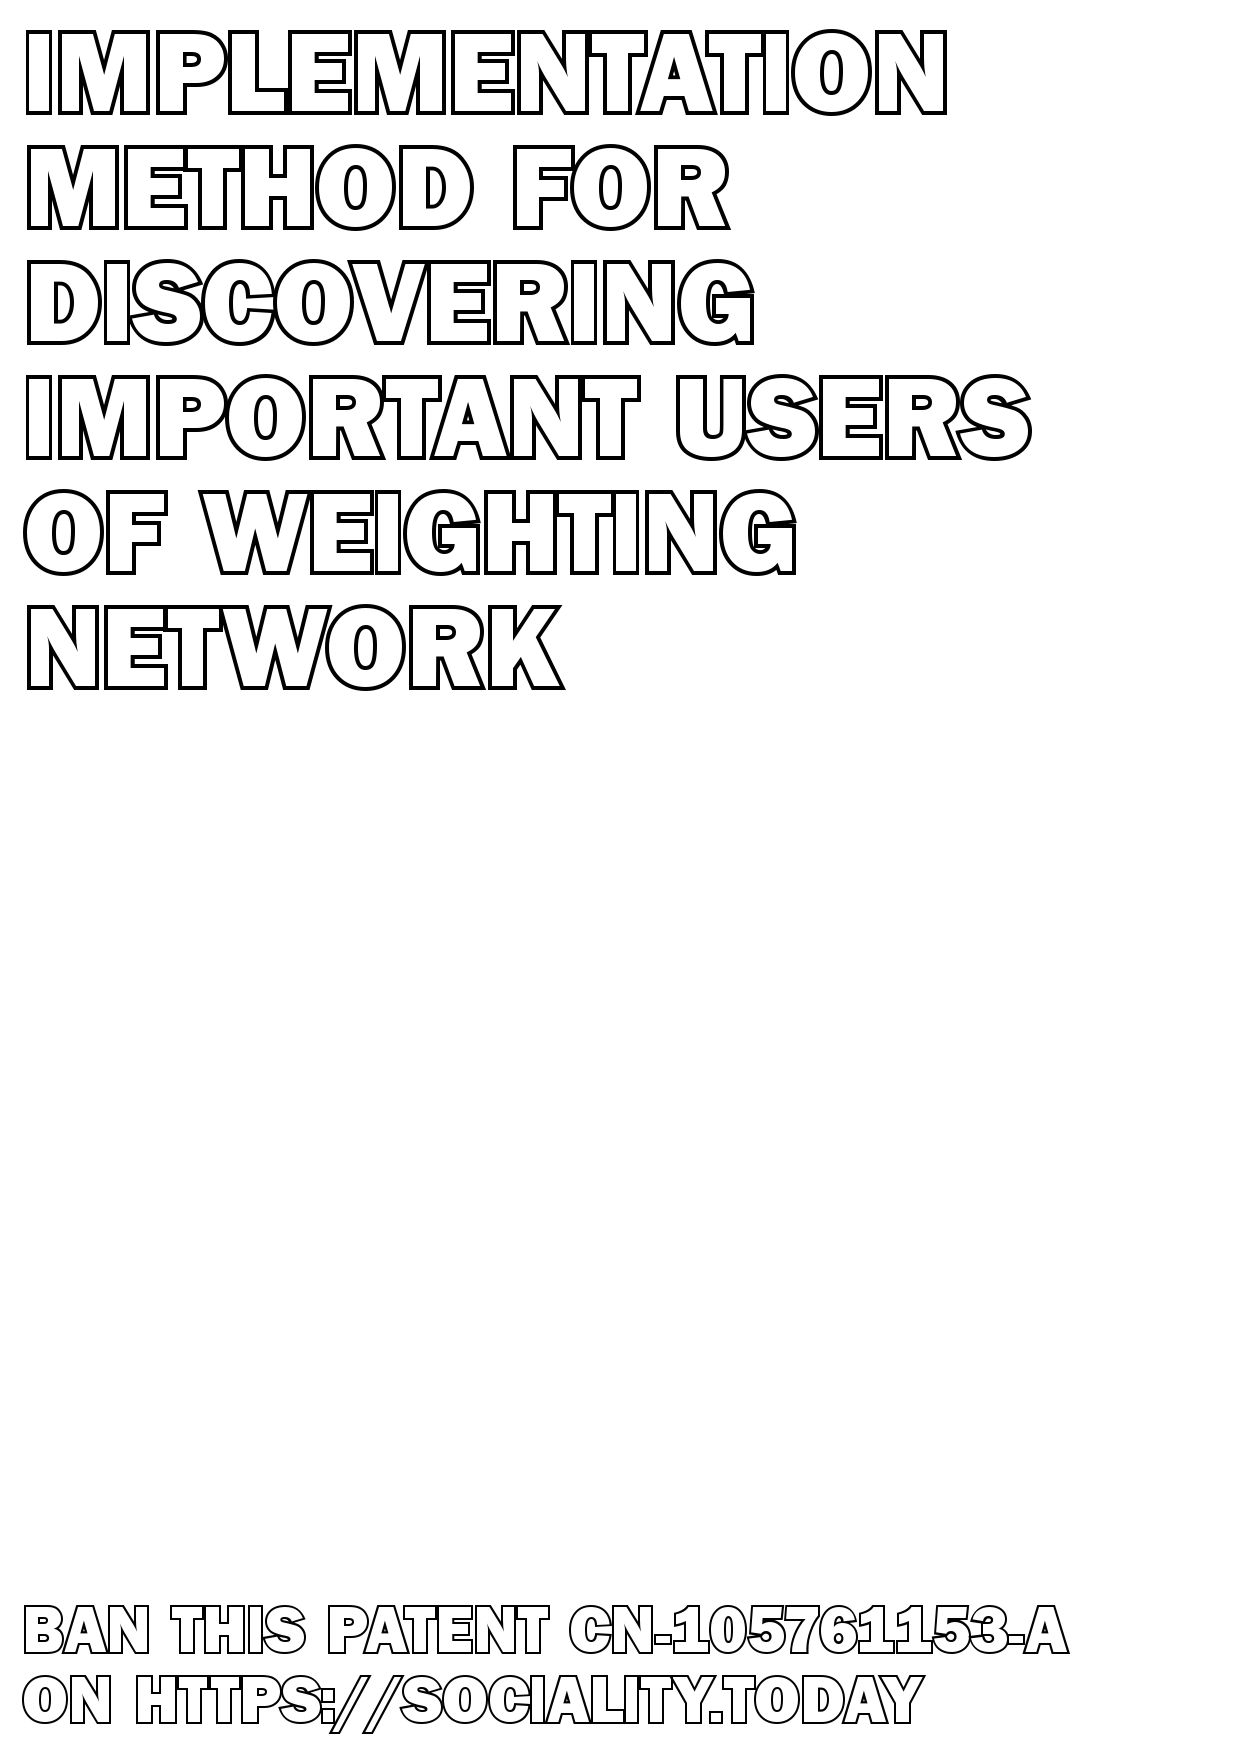 Implementation method for discovering important users of weighting network  - CN-105761153-A